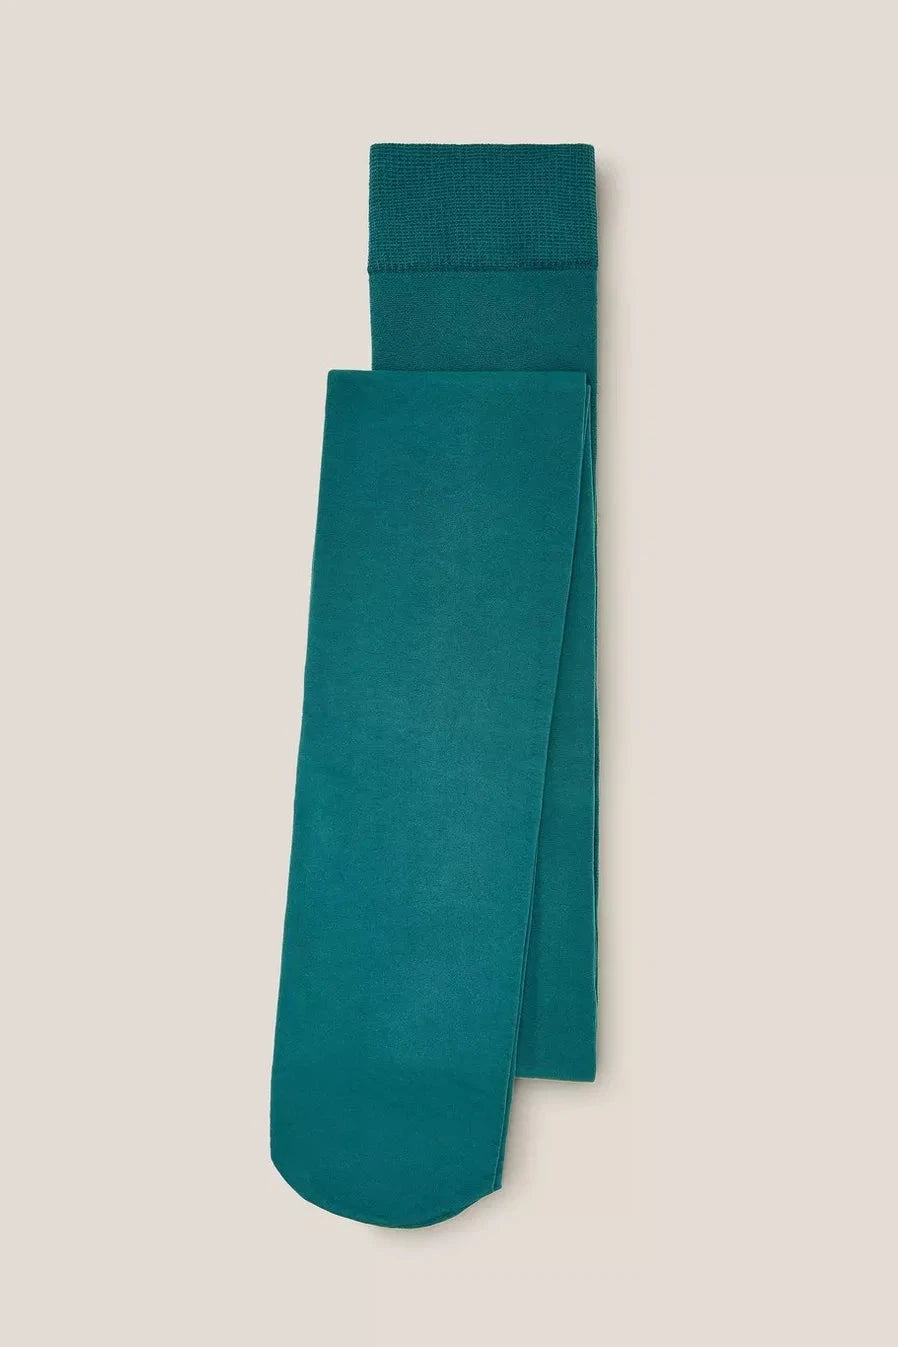 White Stuff Olivia Opaque Tights - Dark Teal-Womens-Ohh! By Gum - Shop Sustainable